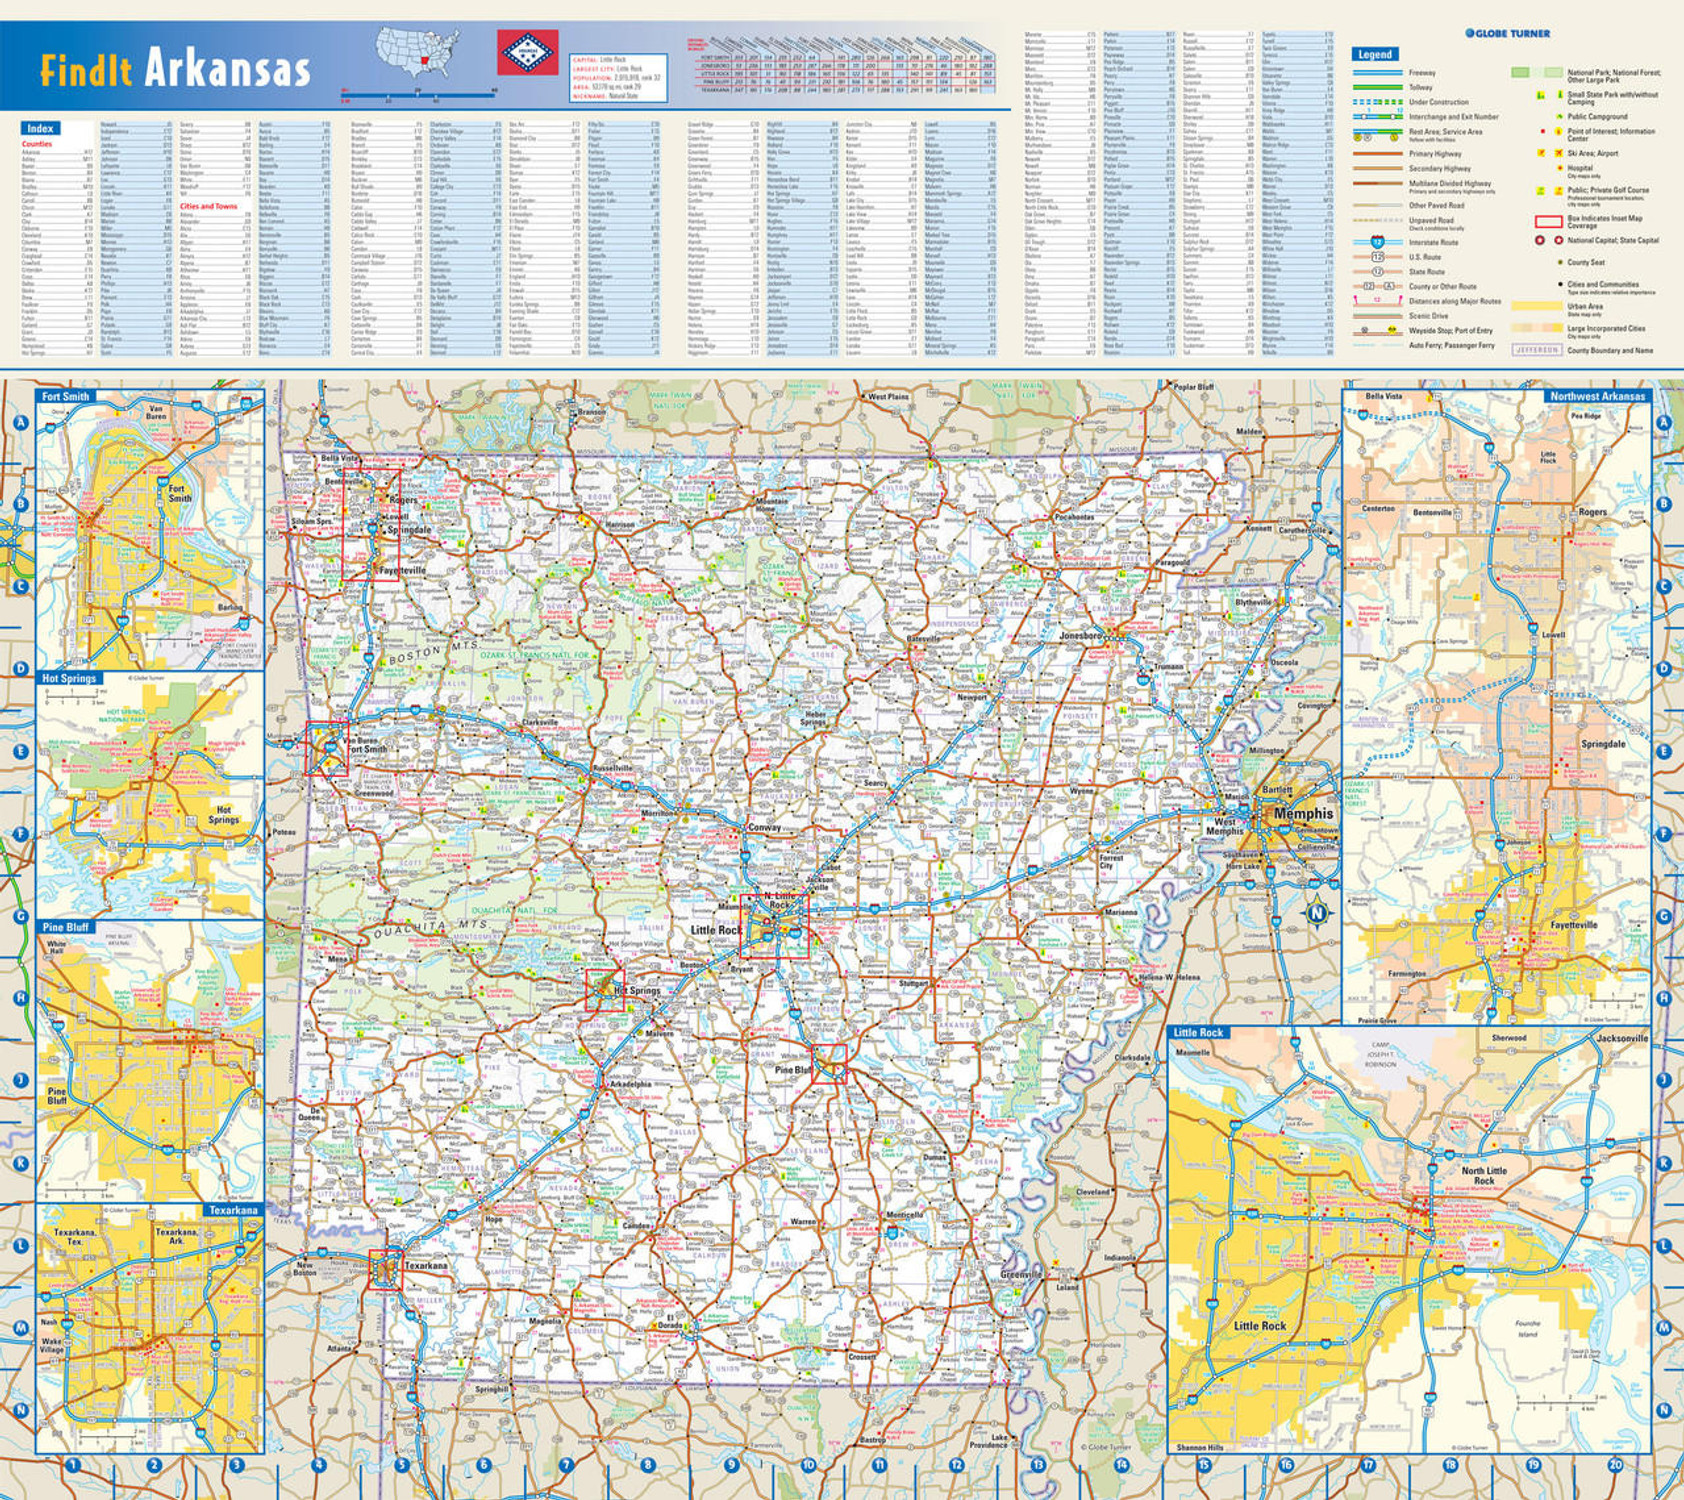 Arkansas Reference Wall Map, image 1, World Maps Online